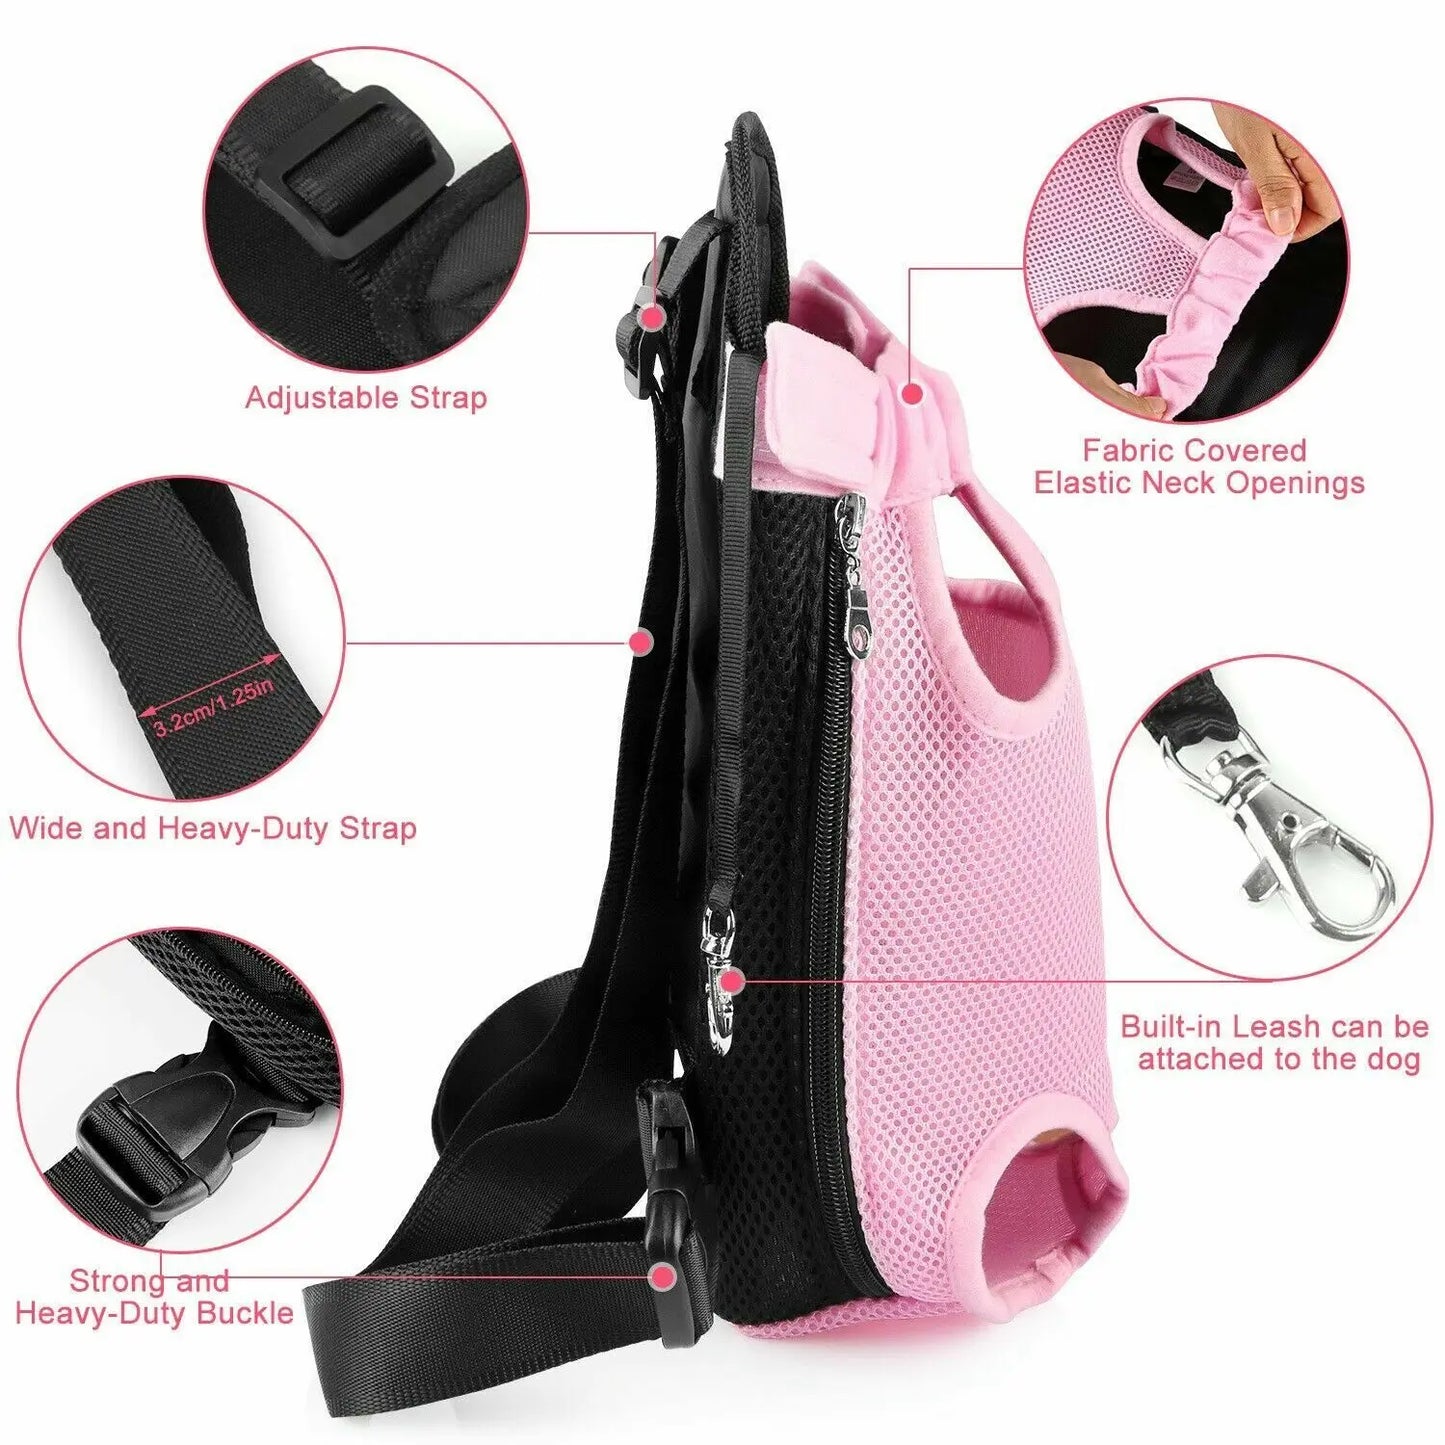 Pet Backpack Carrier For Small Dogs and Cats